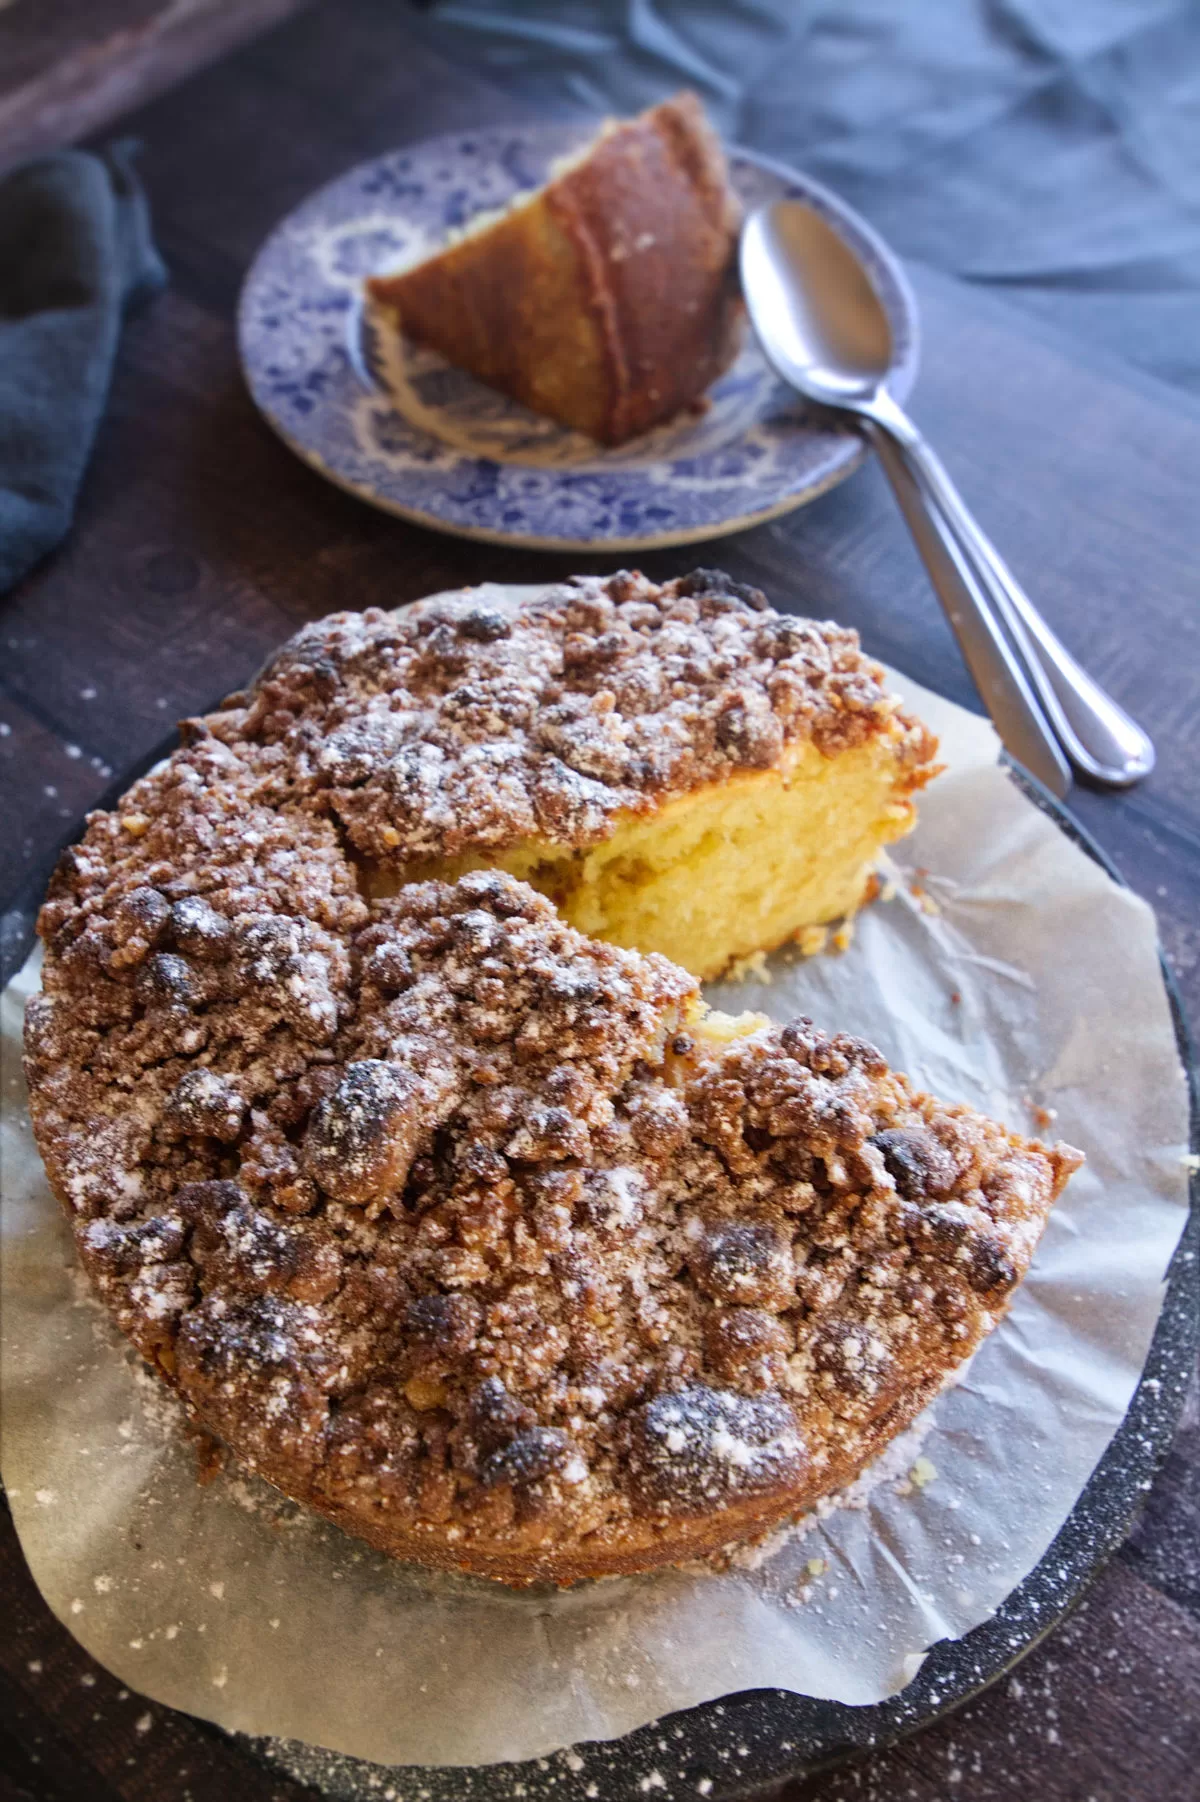 An apple cake is dusted with icing sugar and a slice is served